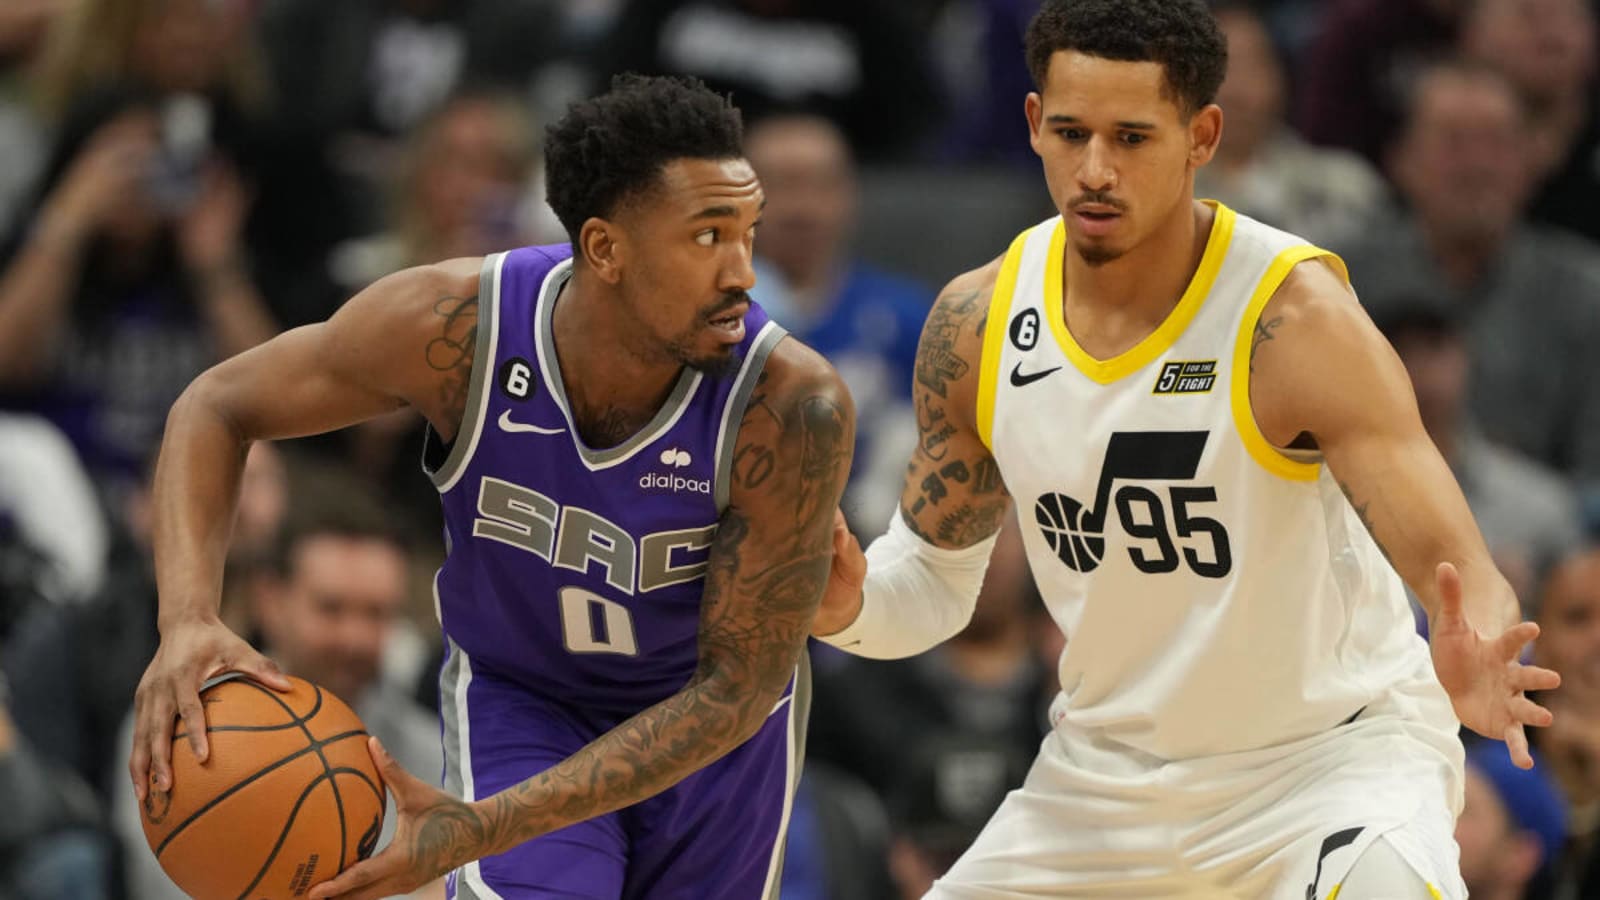 Report: Juan Toscano-Anderson Expected to Re-Sign With Kings on 10-Day